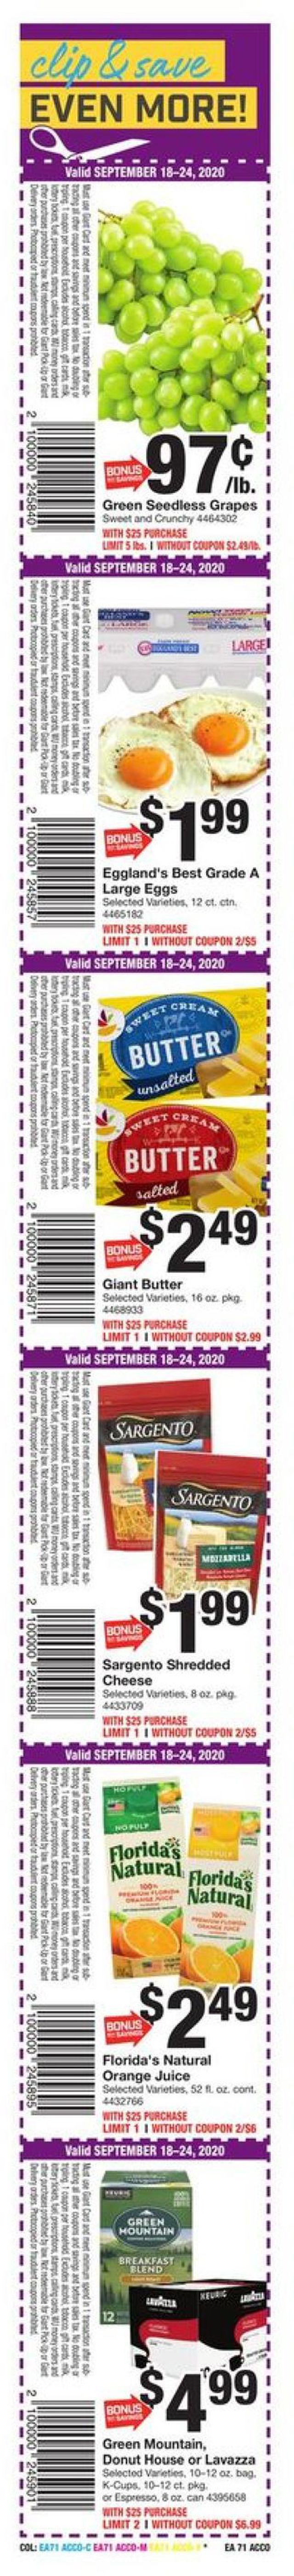 Giant Food Ad from 09/18/2020